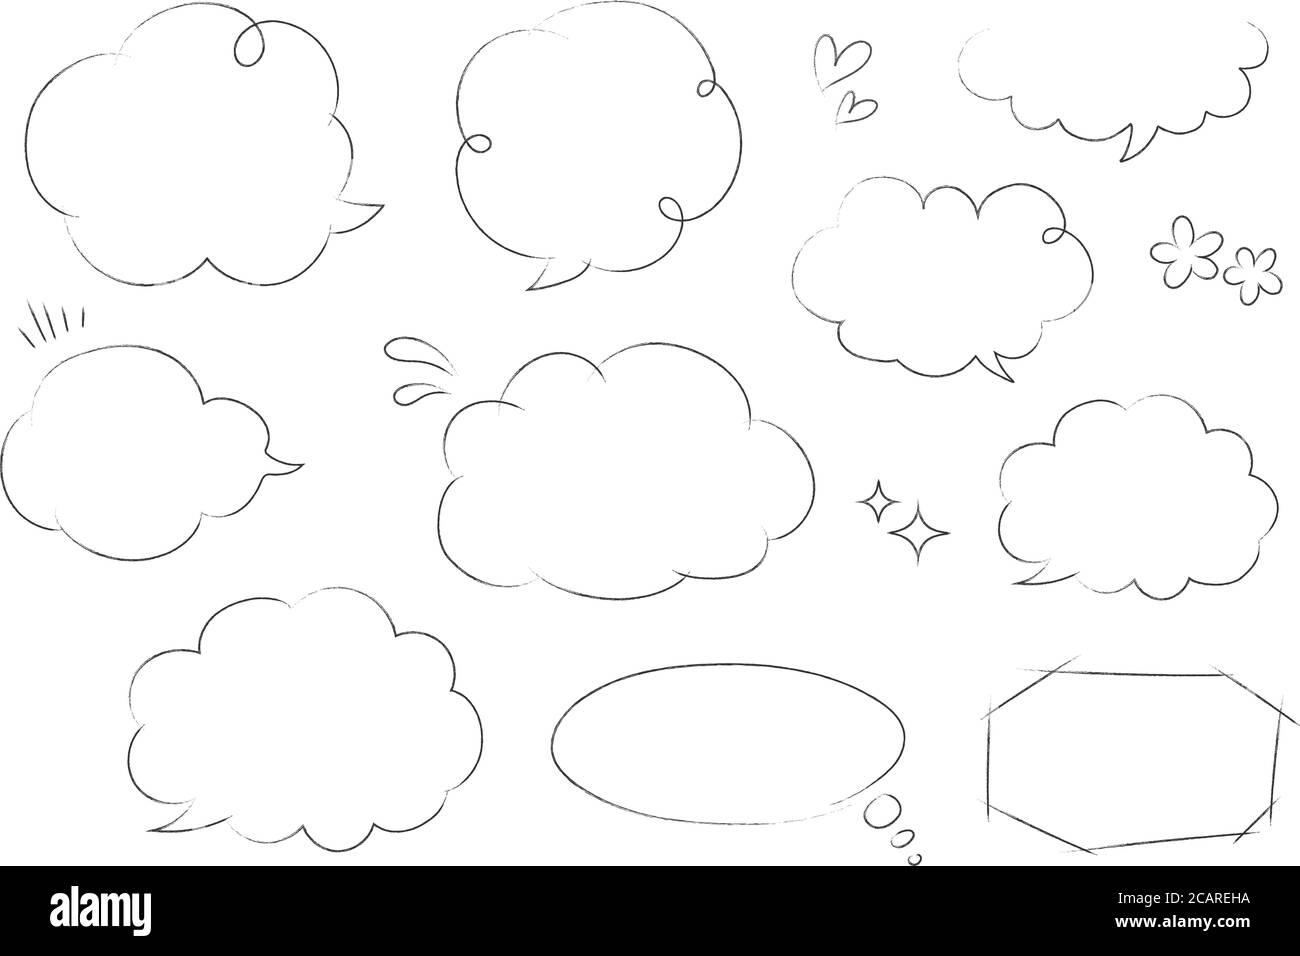 Hand drawn set of speech bubbles. Black and white vector illustration isolated on white background. Stock Vector